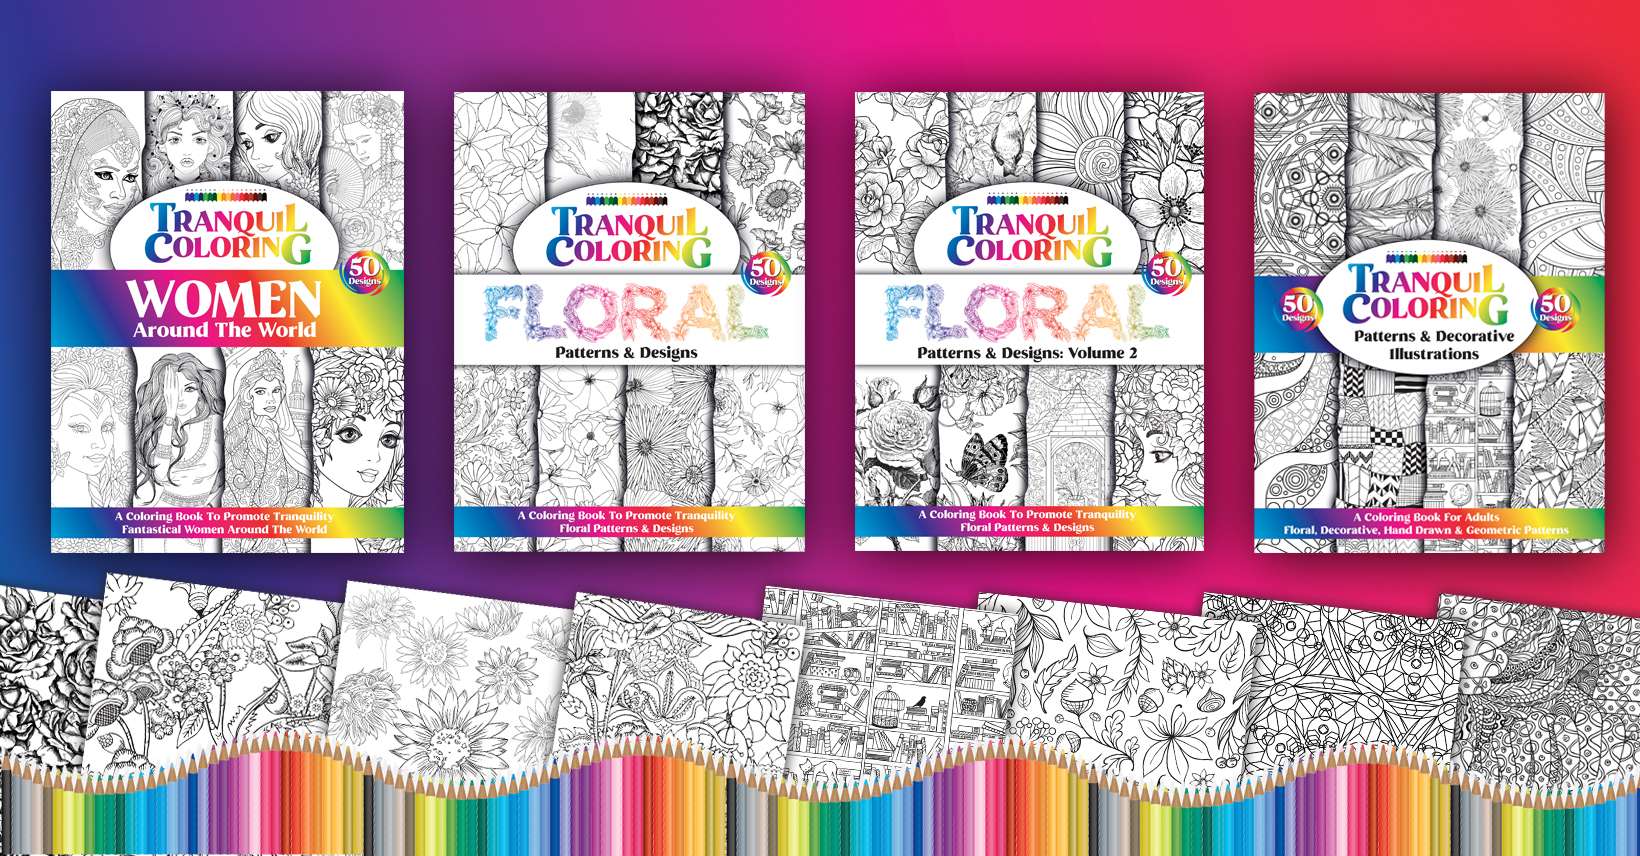 Tranquil Coloring books